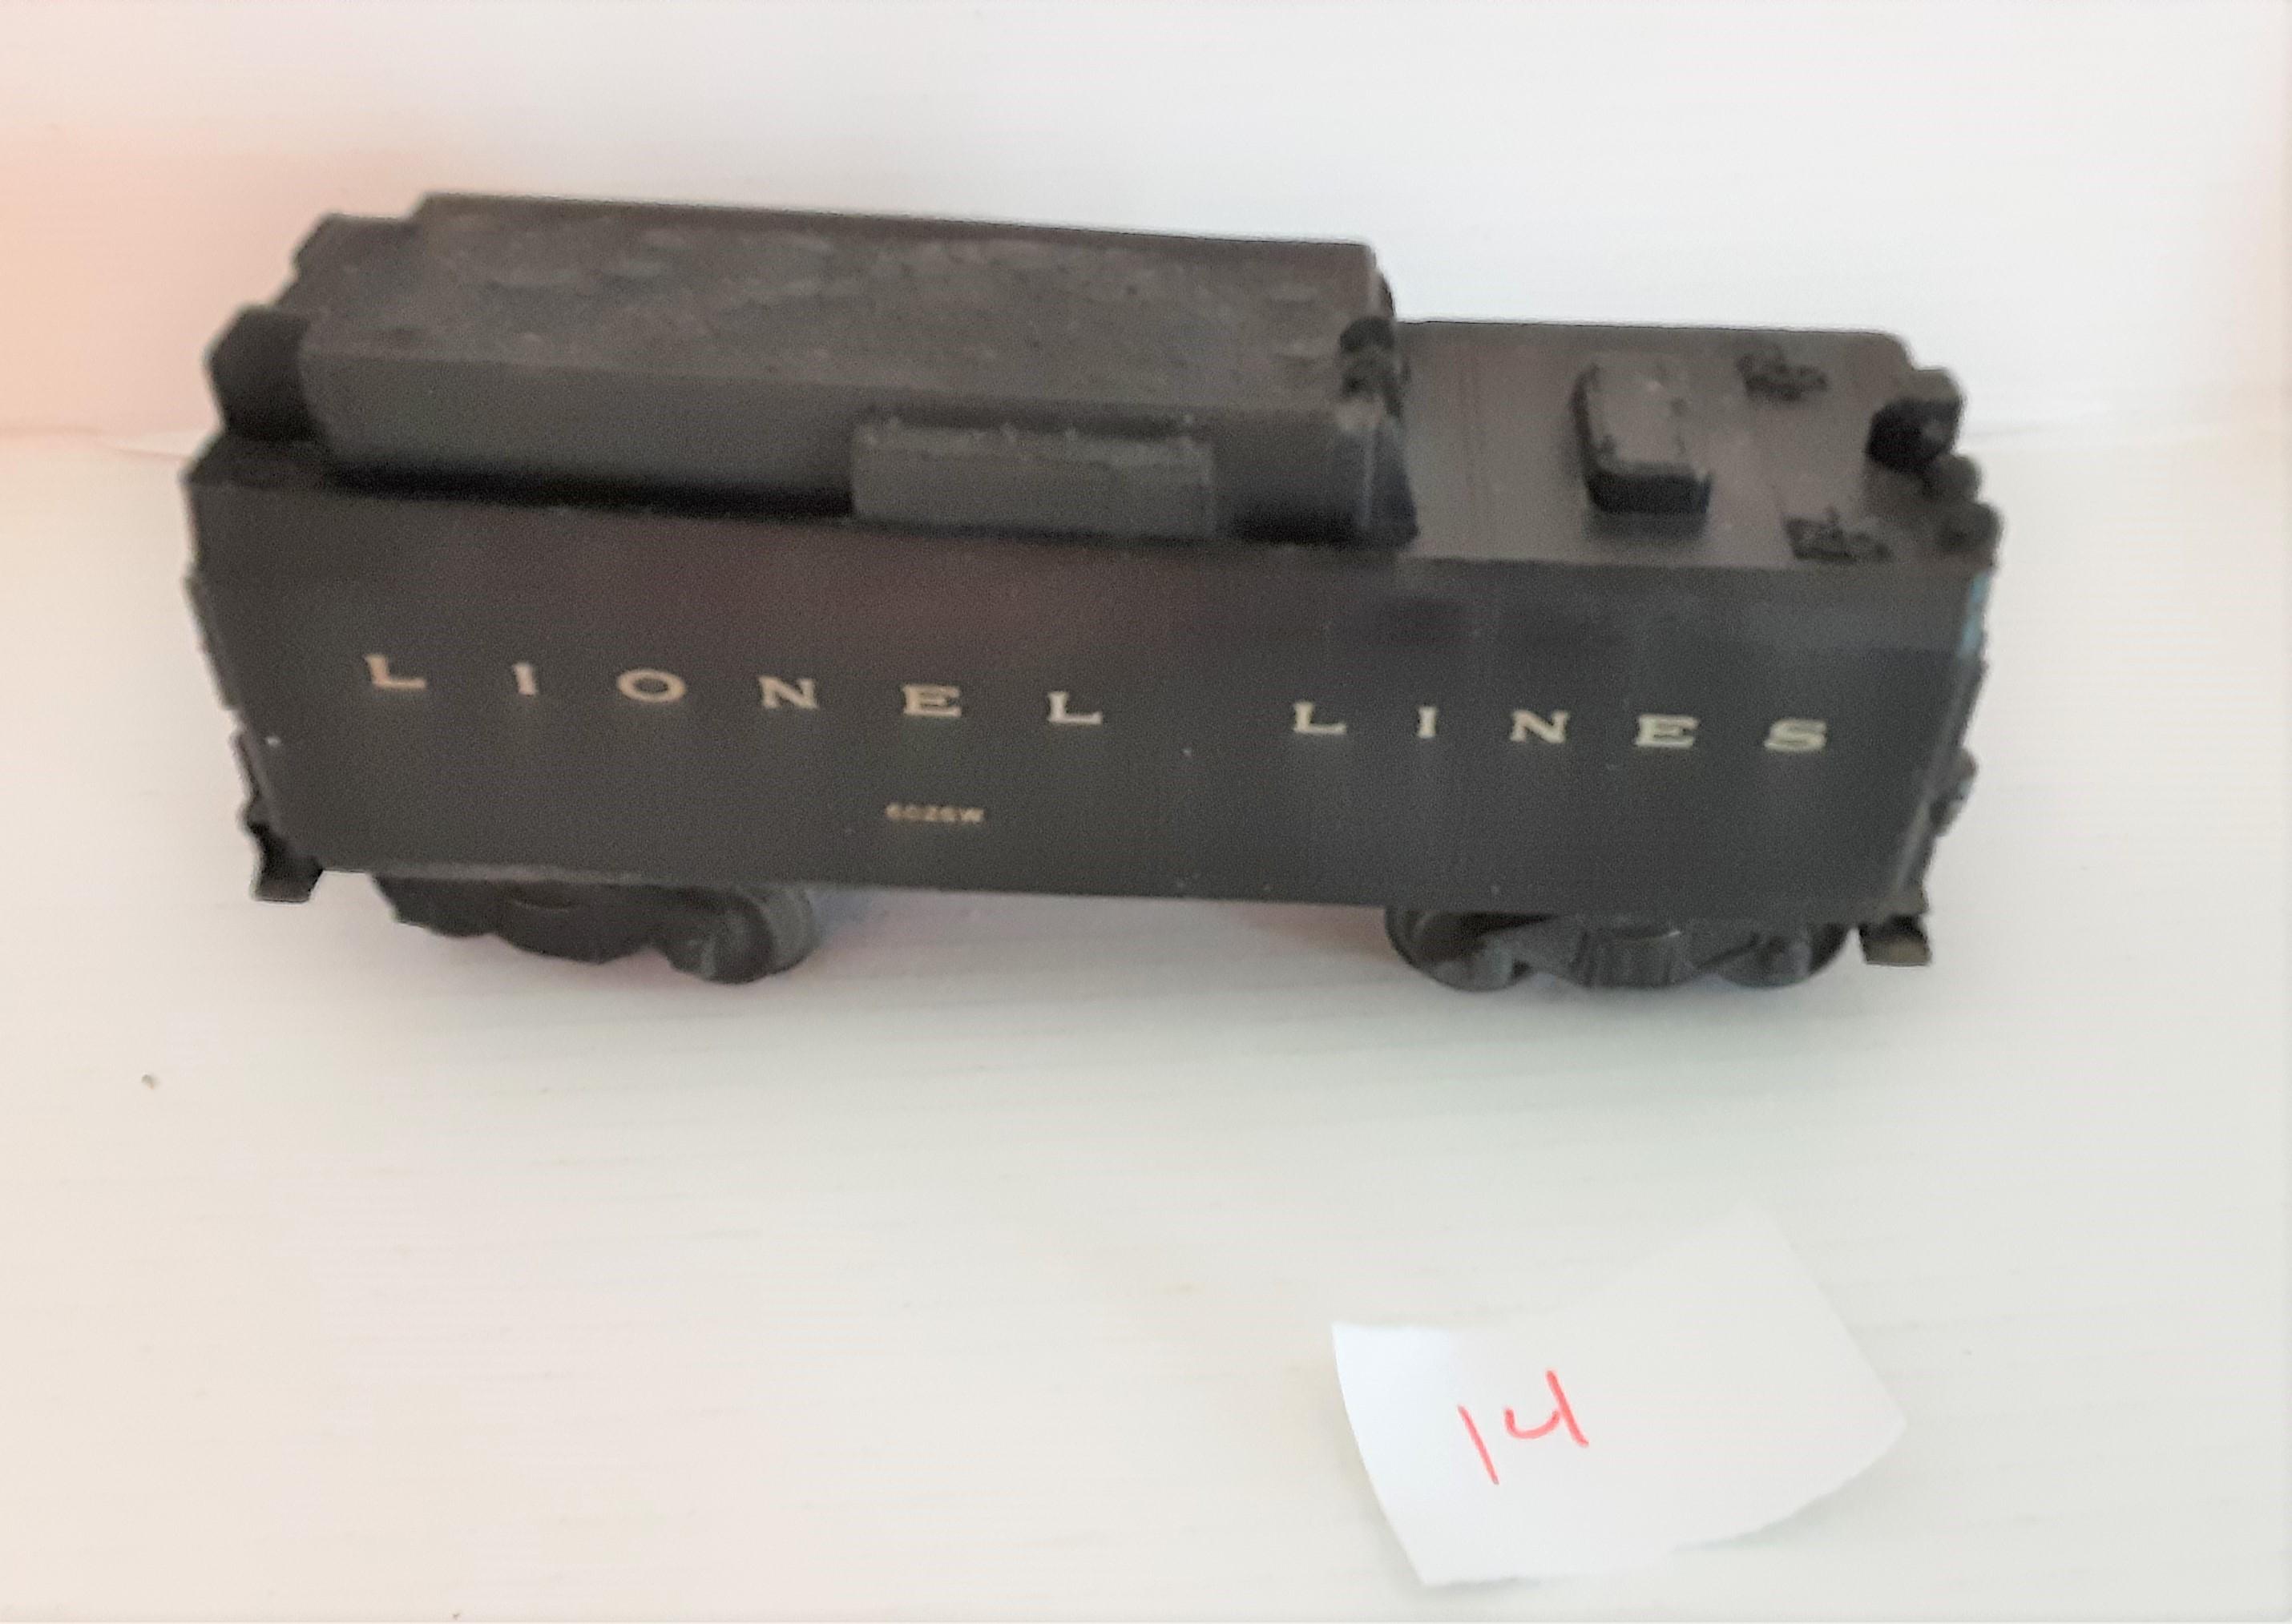 Lionel Lines 6026W